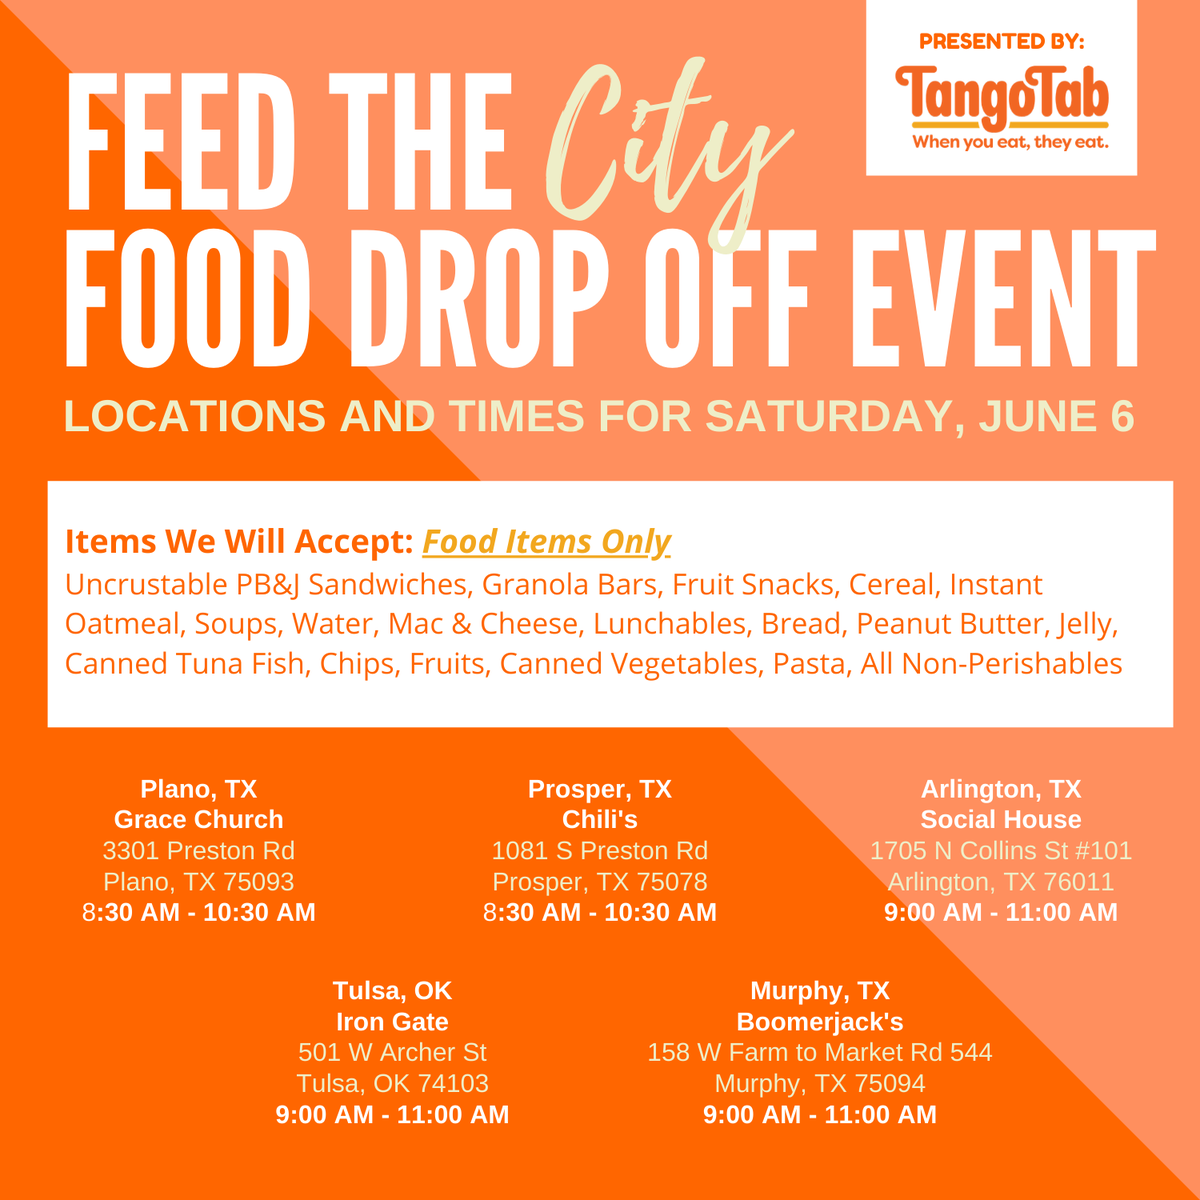 THIS SATURDAY! We are back with FIVE Feed The City Drop Off Events!!!